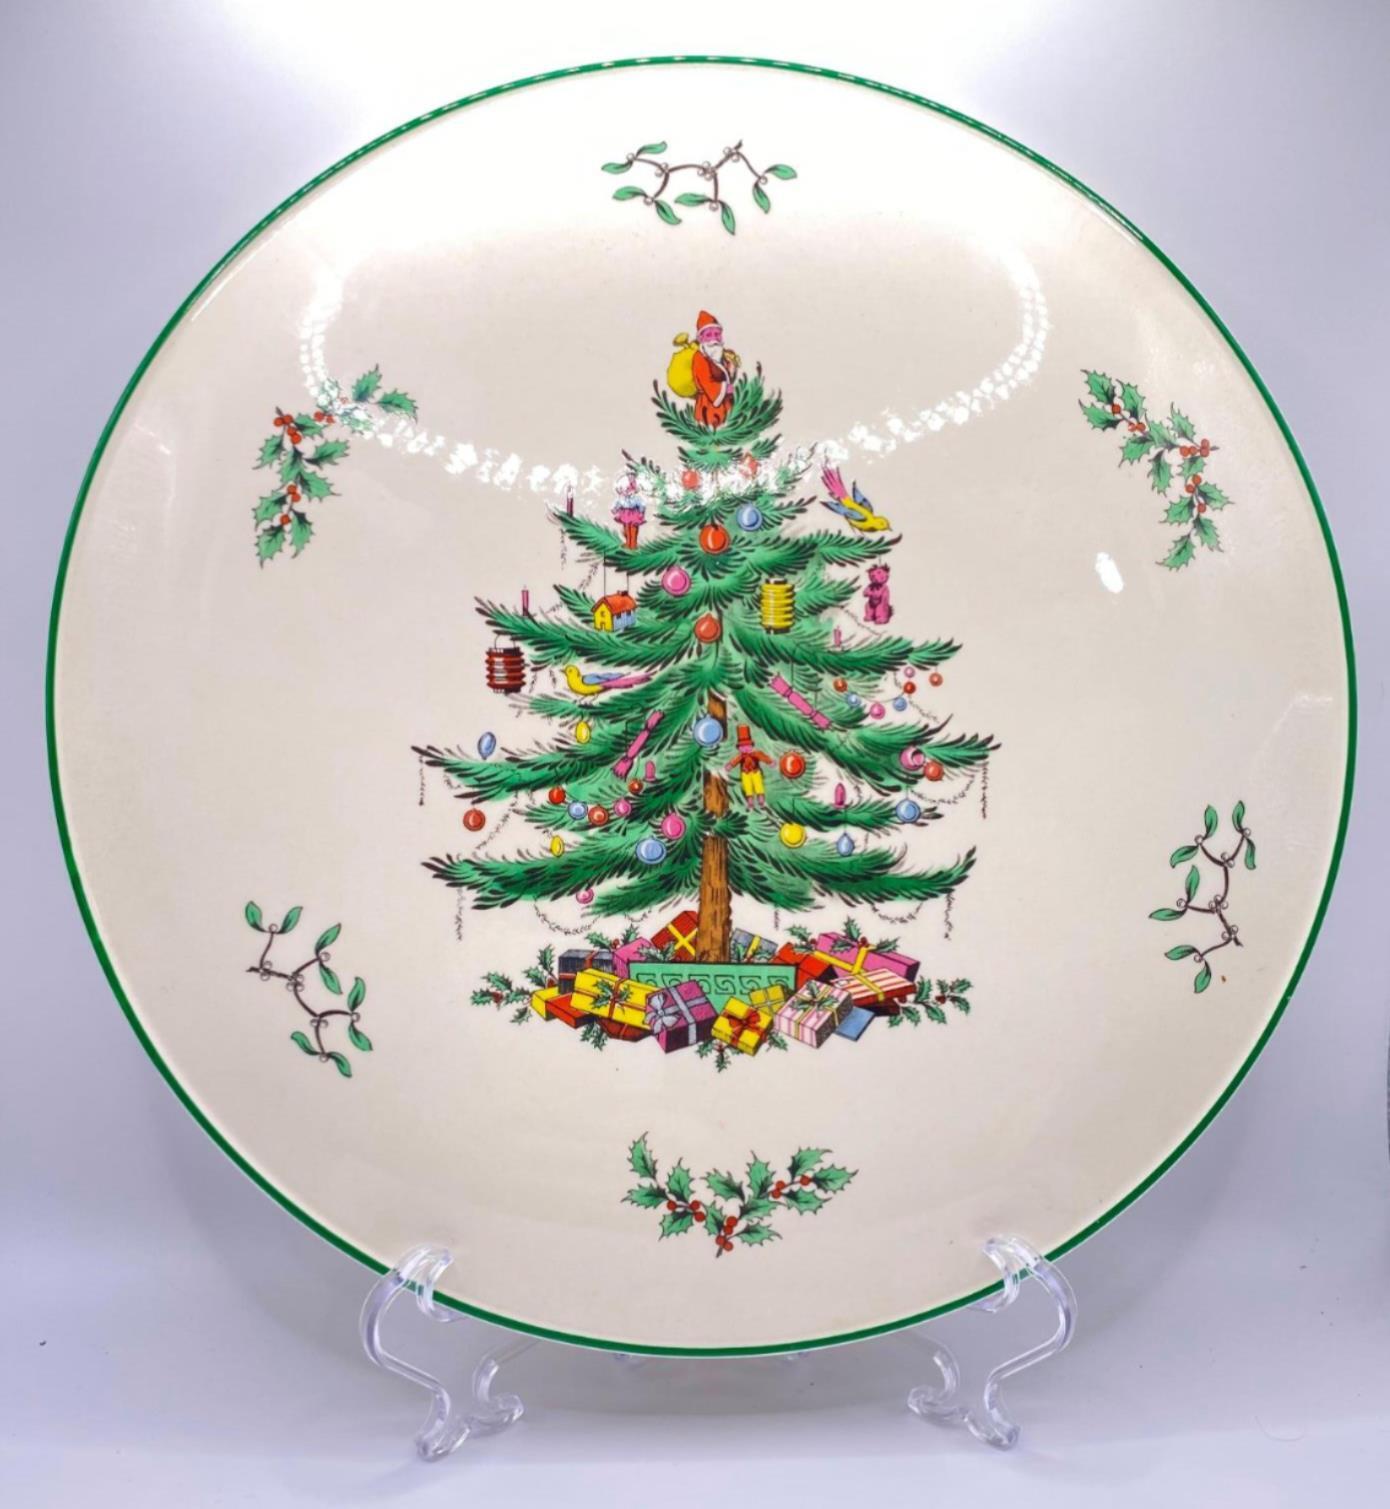 Spode Christmas Tree Footed Server Plate S 3324 S #15 Cake Pie Cheese Plate VTG